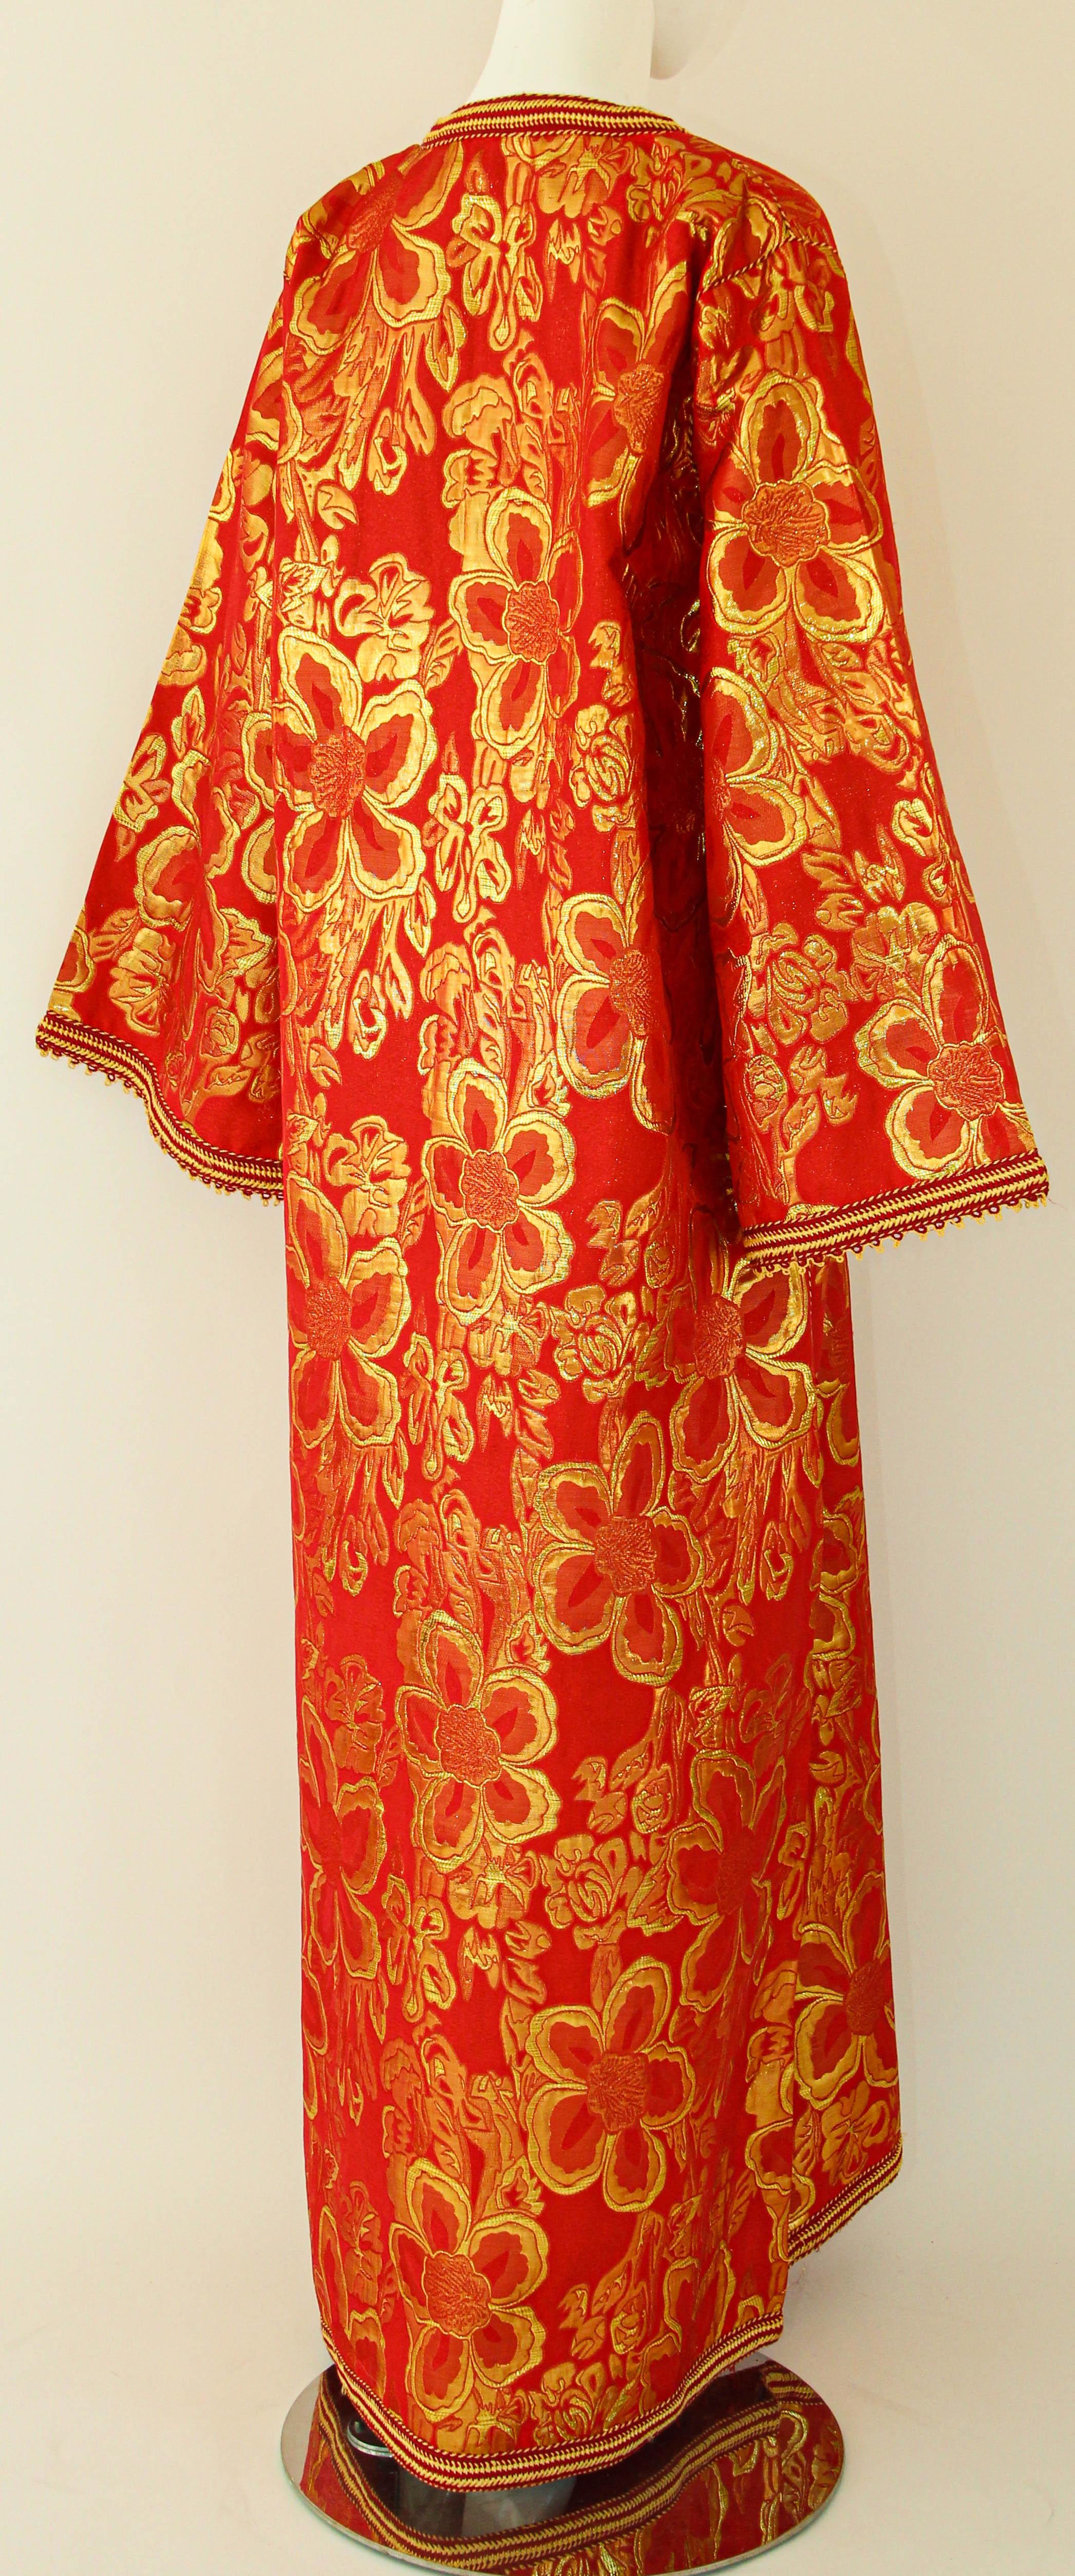 1970s Vintage Moroccan Kaftan Red and Gold Brocade Caftan Maxi Dress For Sale 7